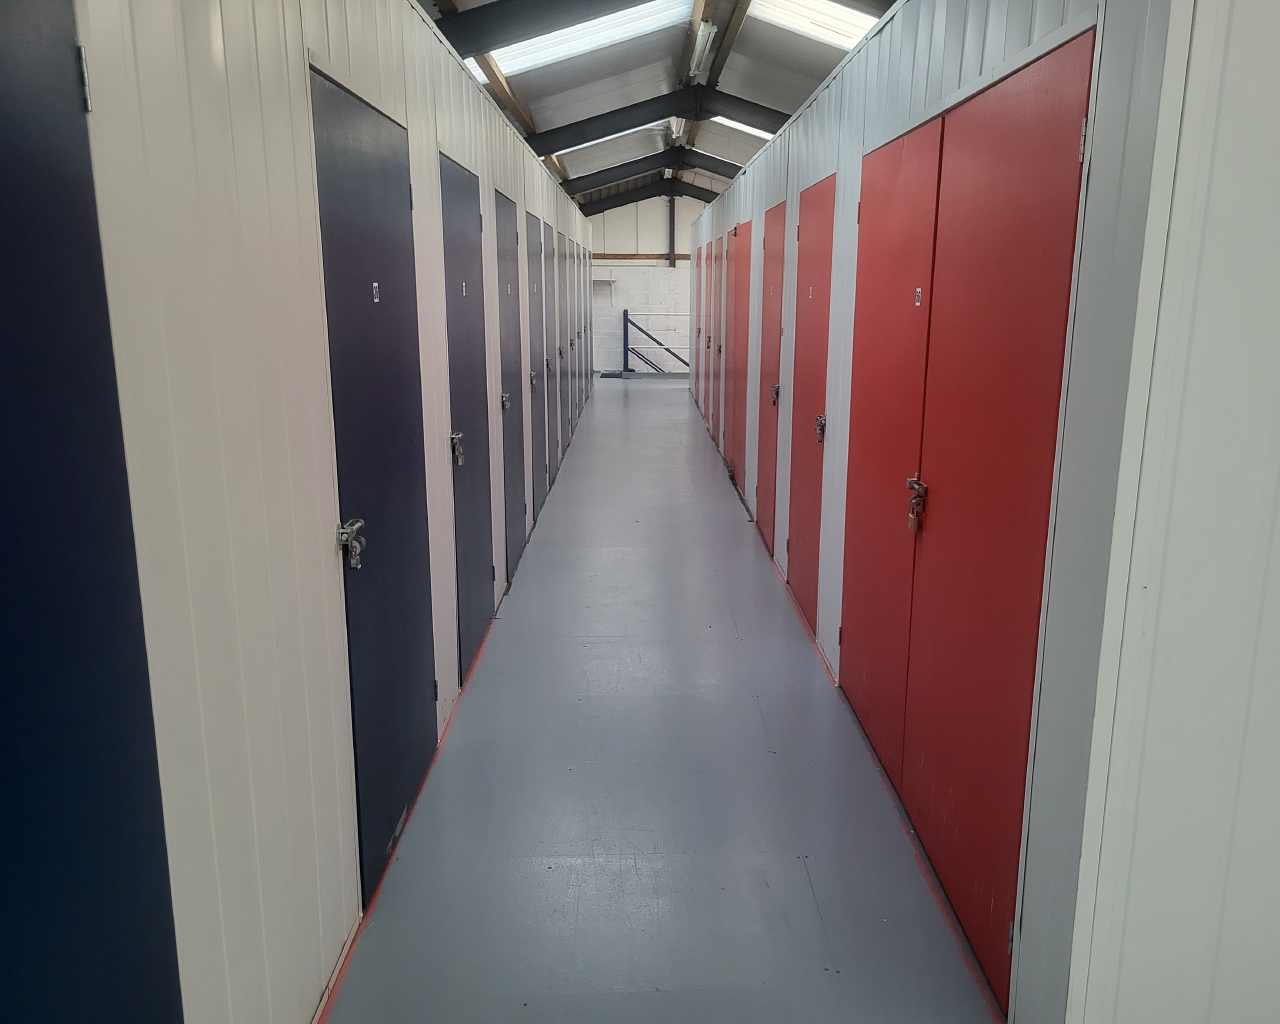 Photo of corridor with red/blue doors leading into storage containers.